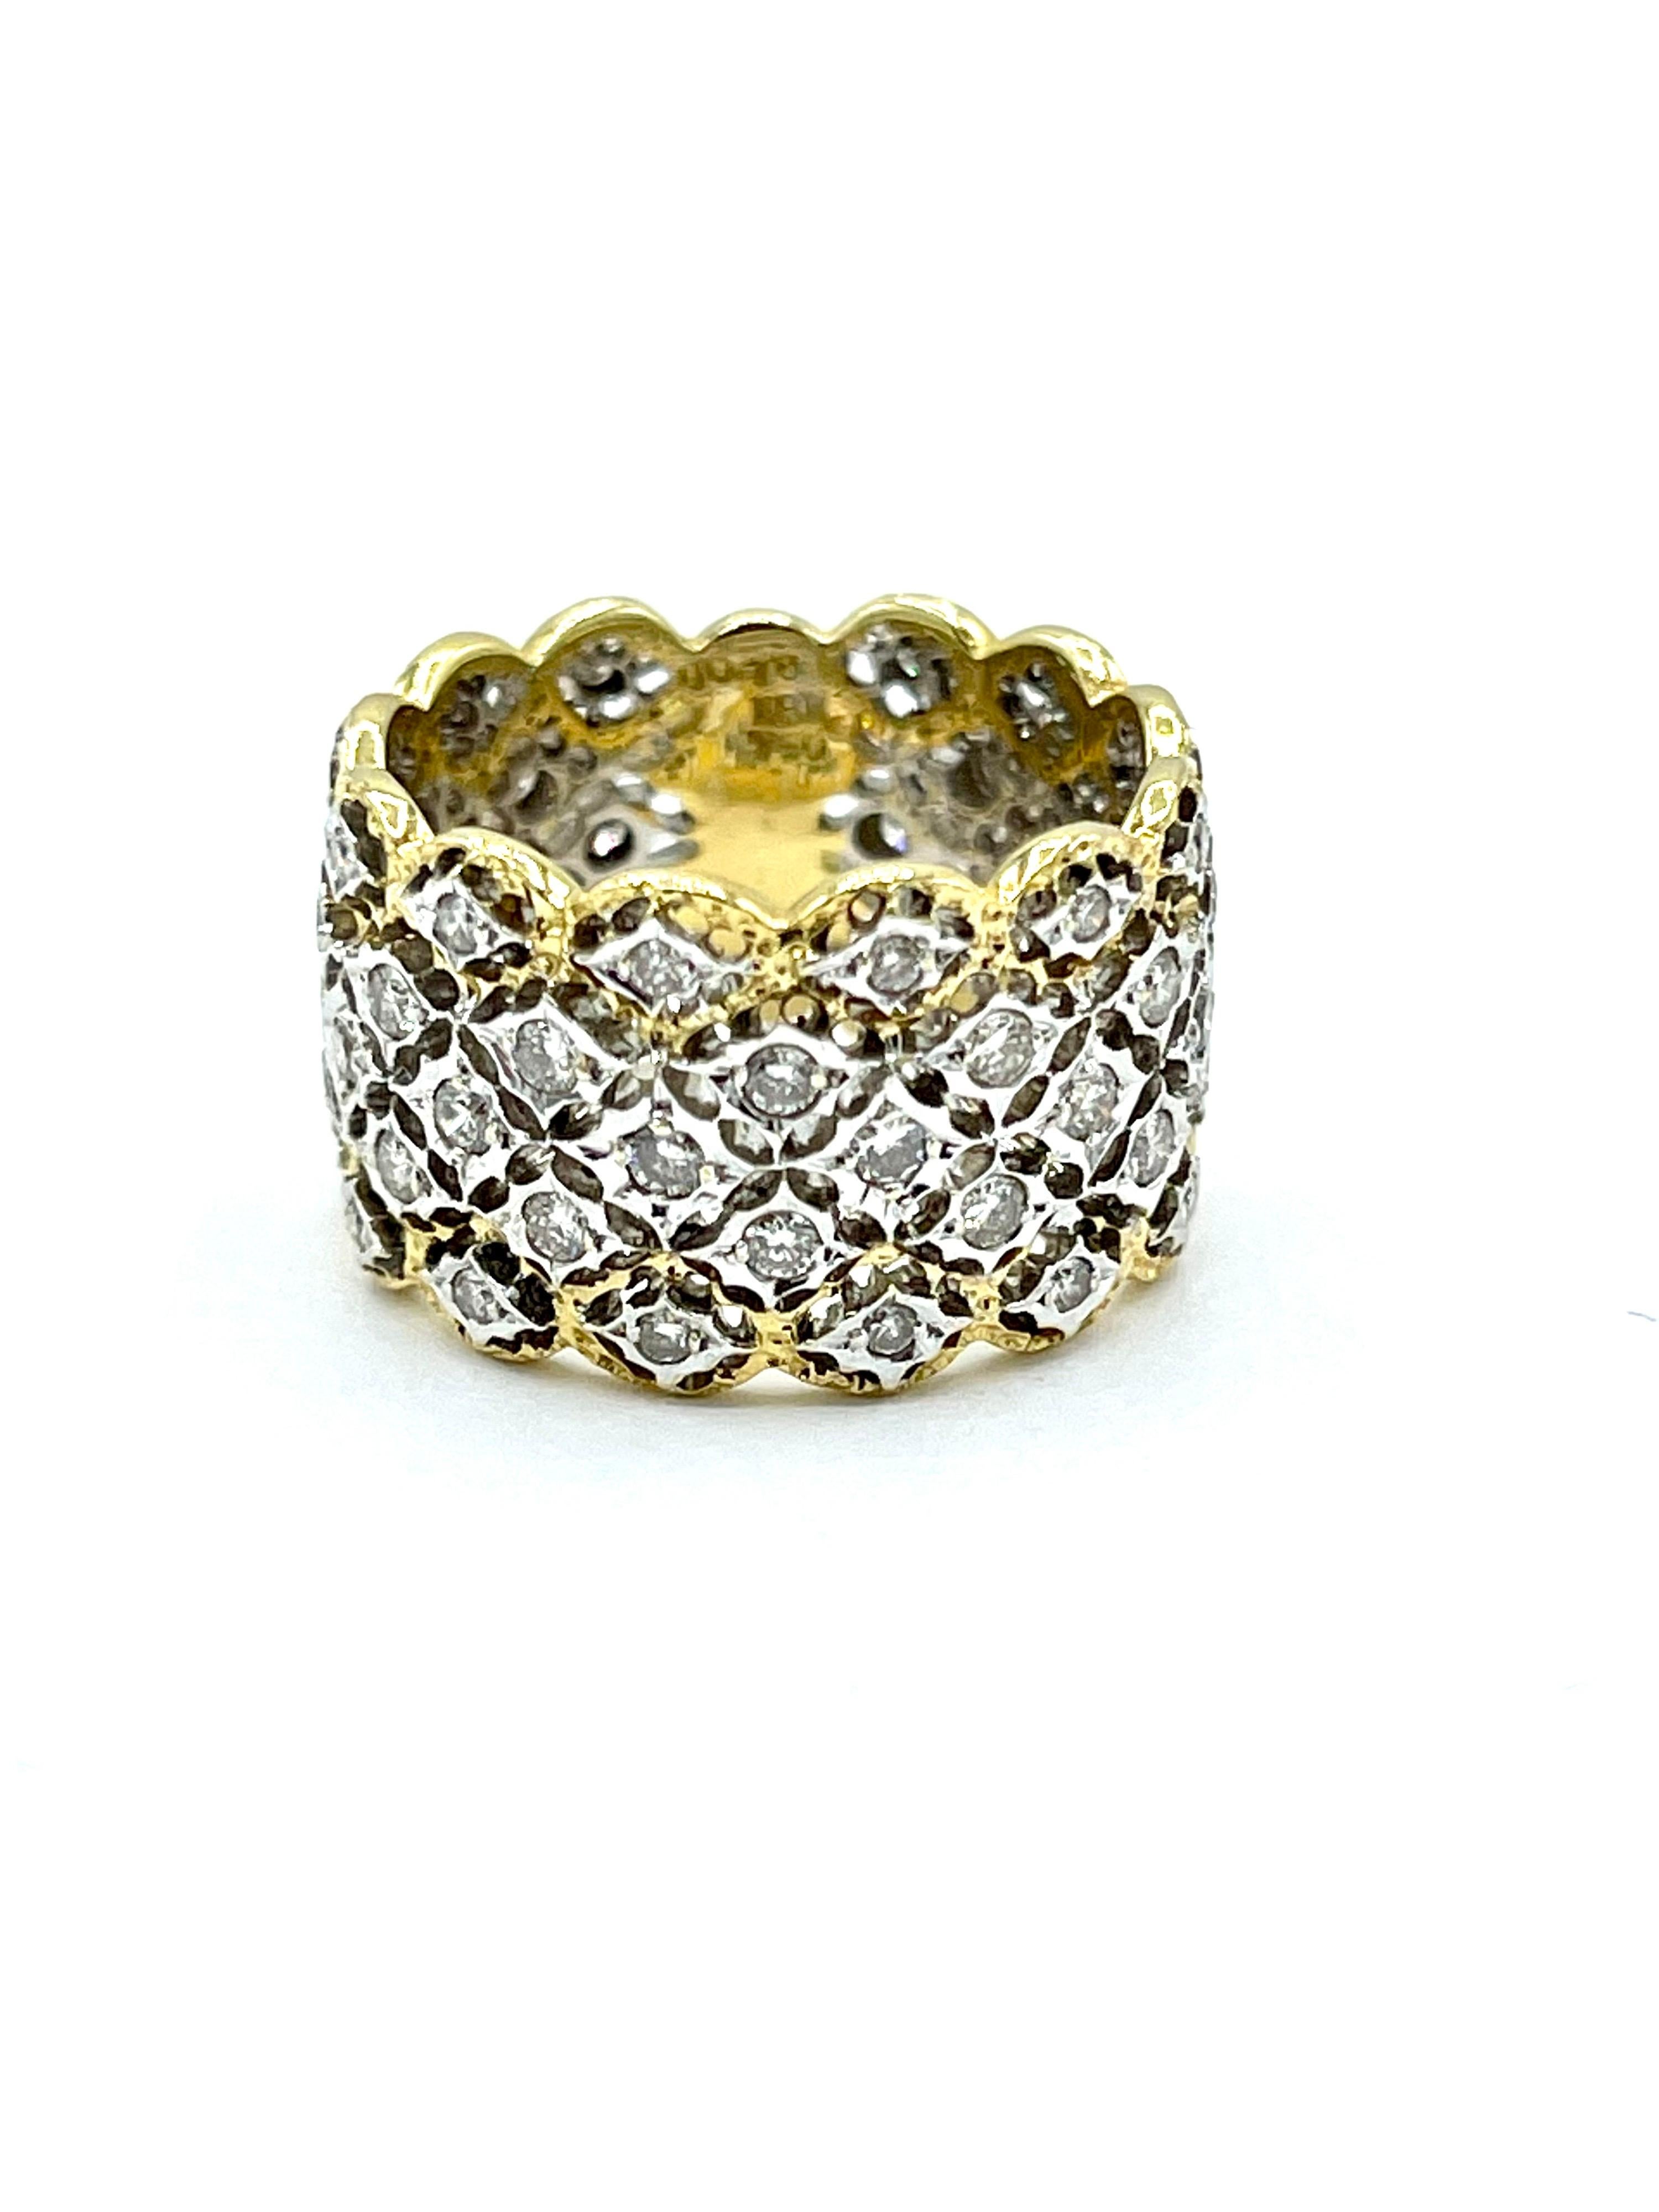 A beautiful round brilliant Diamond band style ring.  The ring contains 0.78 carats of Diamonds all set in 18K white gold open metal work, with a 18K yellow gold border.  The Diamonds are graded G-H color, VS2 clarity.  The inside bottom of the